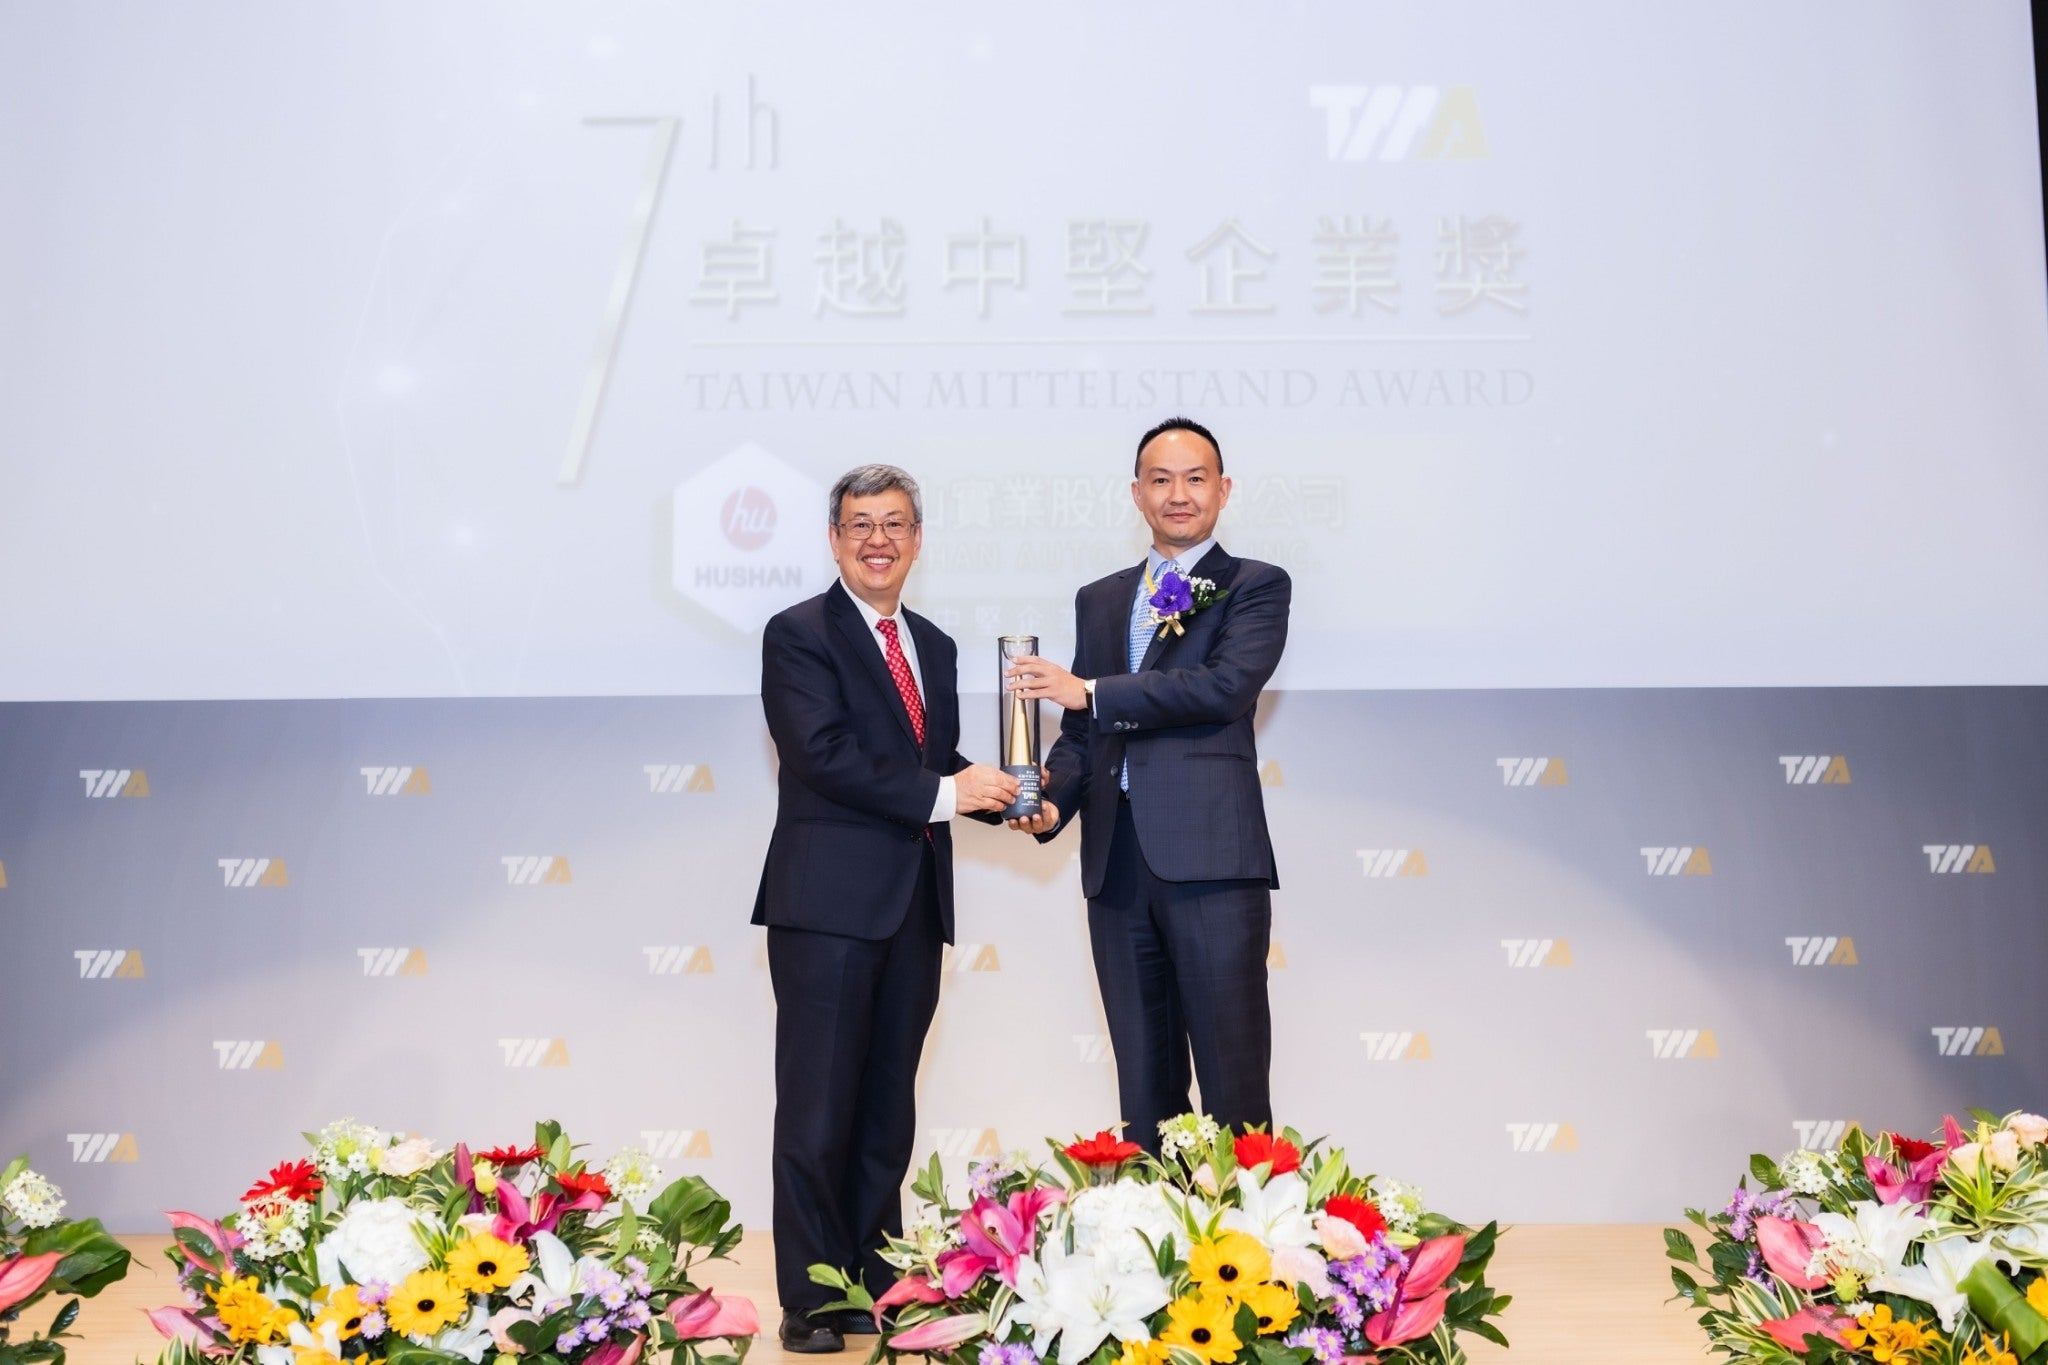 HUSHAN Autoparts Inc. -Received the 7th Taiwan Mittelstand Award.